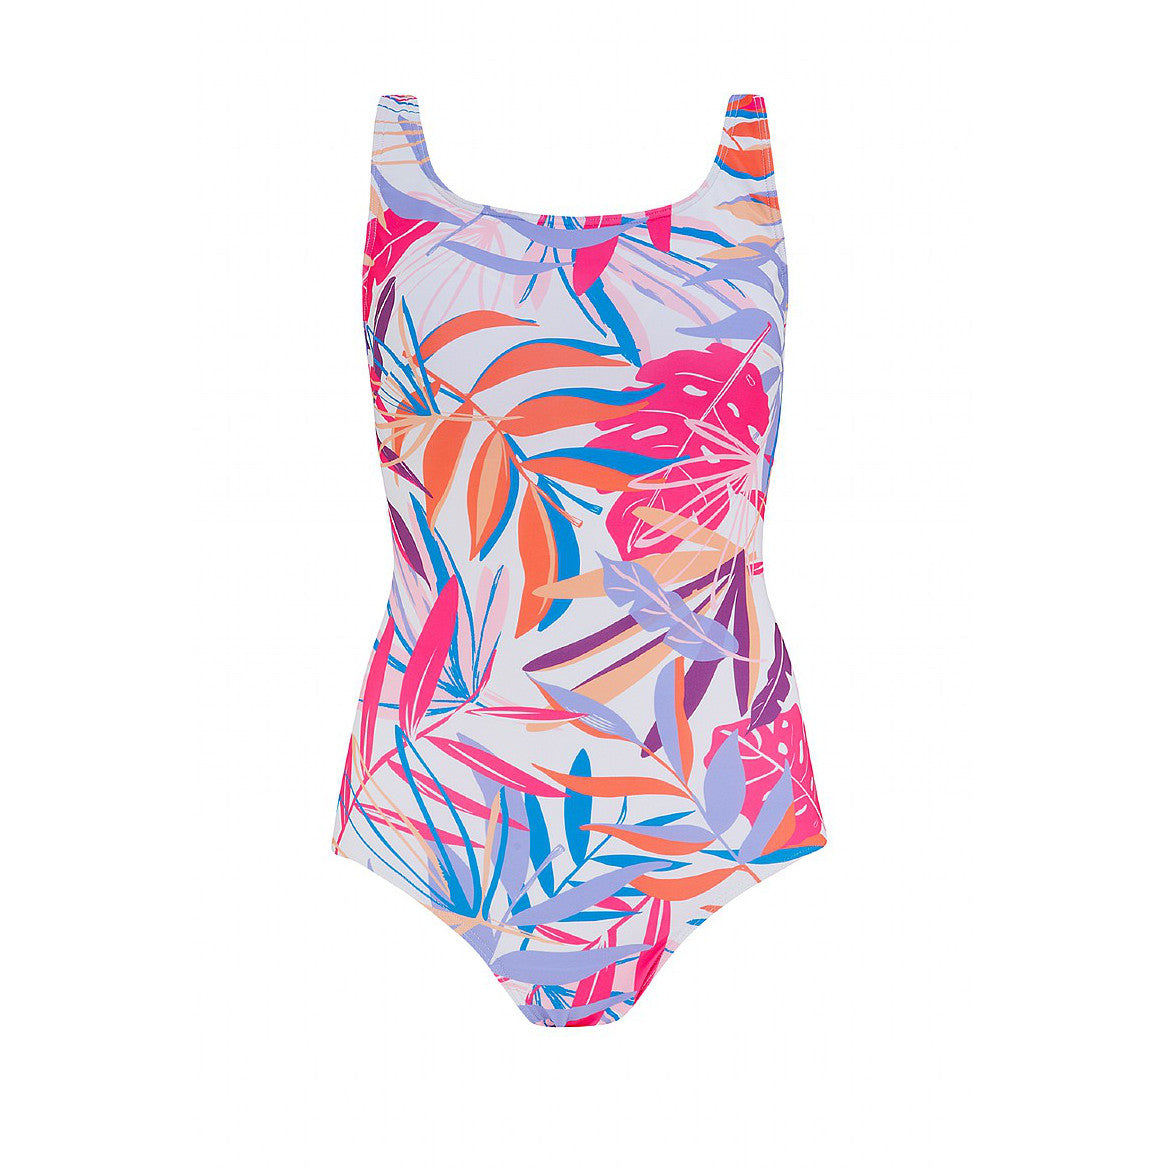 Cocoa Beach Swimsuit in a vibrant palm leaf print | Swimwear from Nicola Jane | Pocketed mastectomy swimwear for women touched by breast cancer